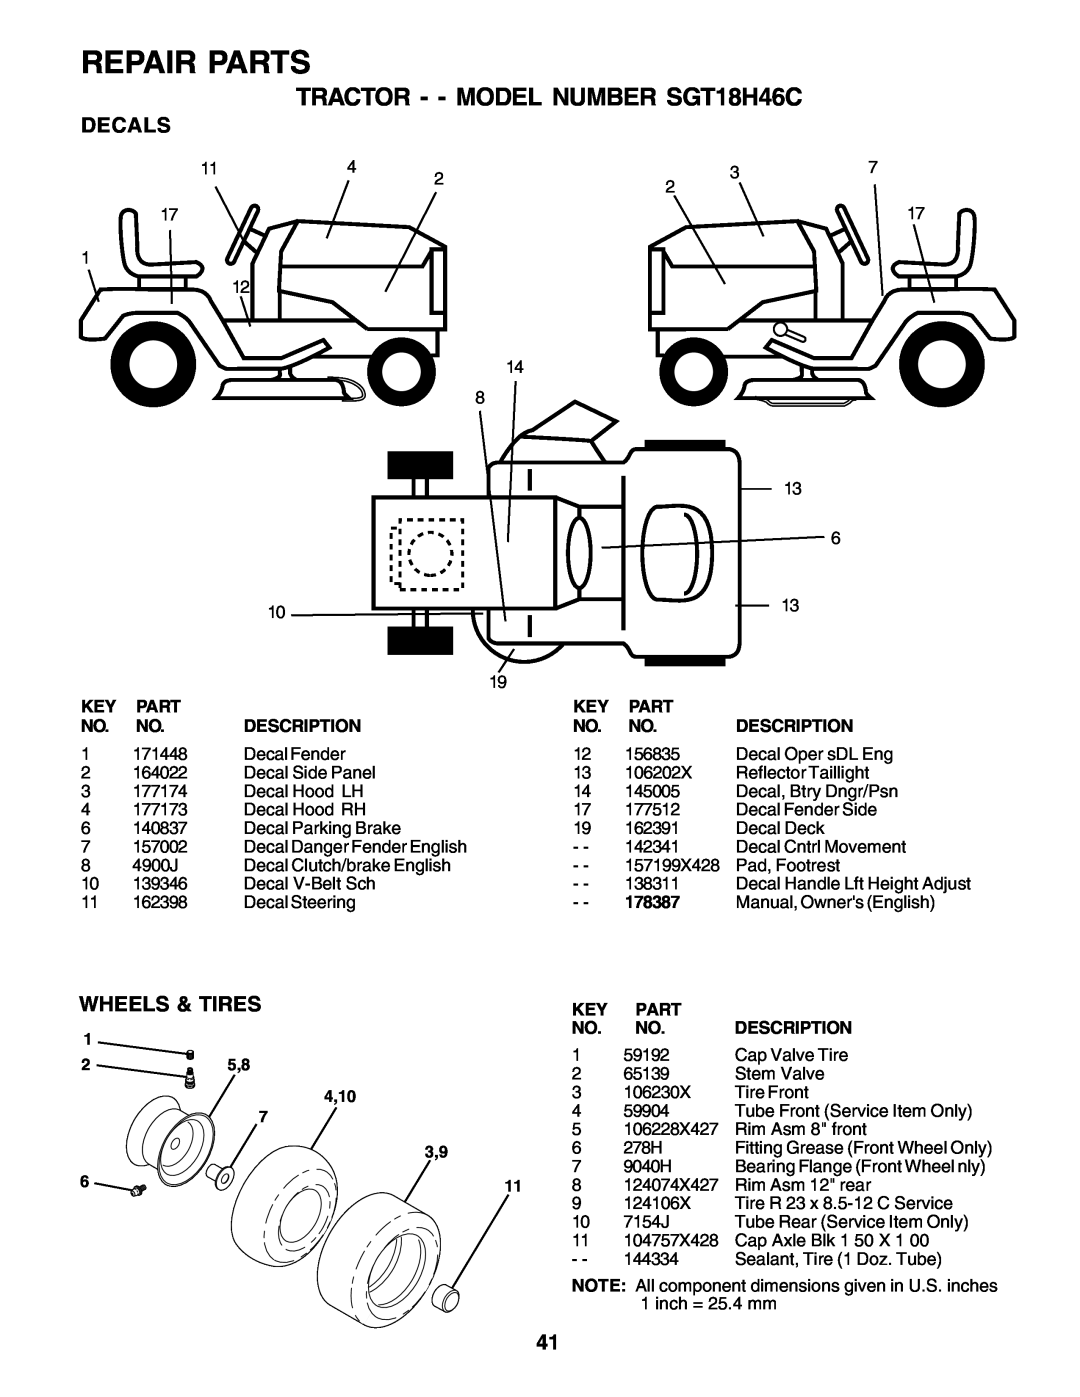 Weed Eater 178387 owner manual Repair Parts, TRACTOR - - MODEL NUMBER SGT18H46C, Decals, Wheels & Tires, 4,10 